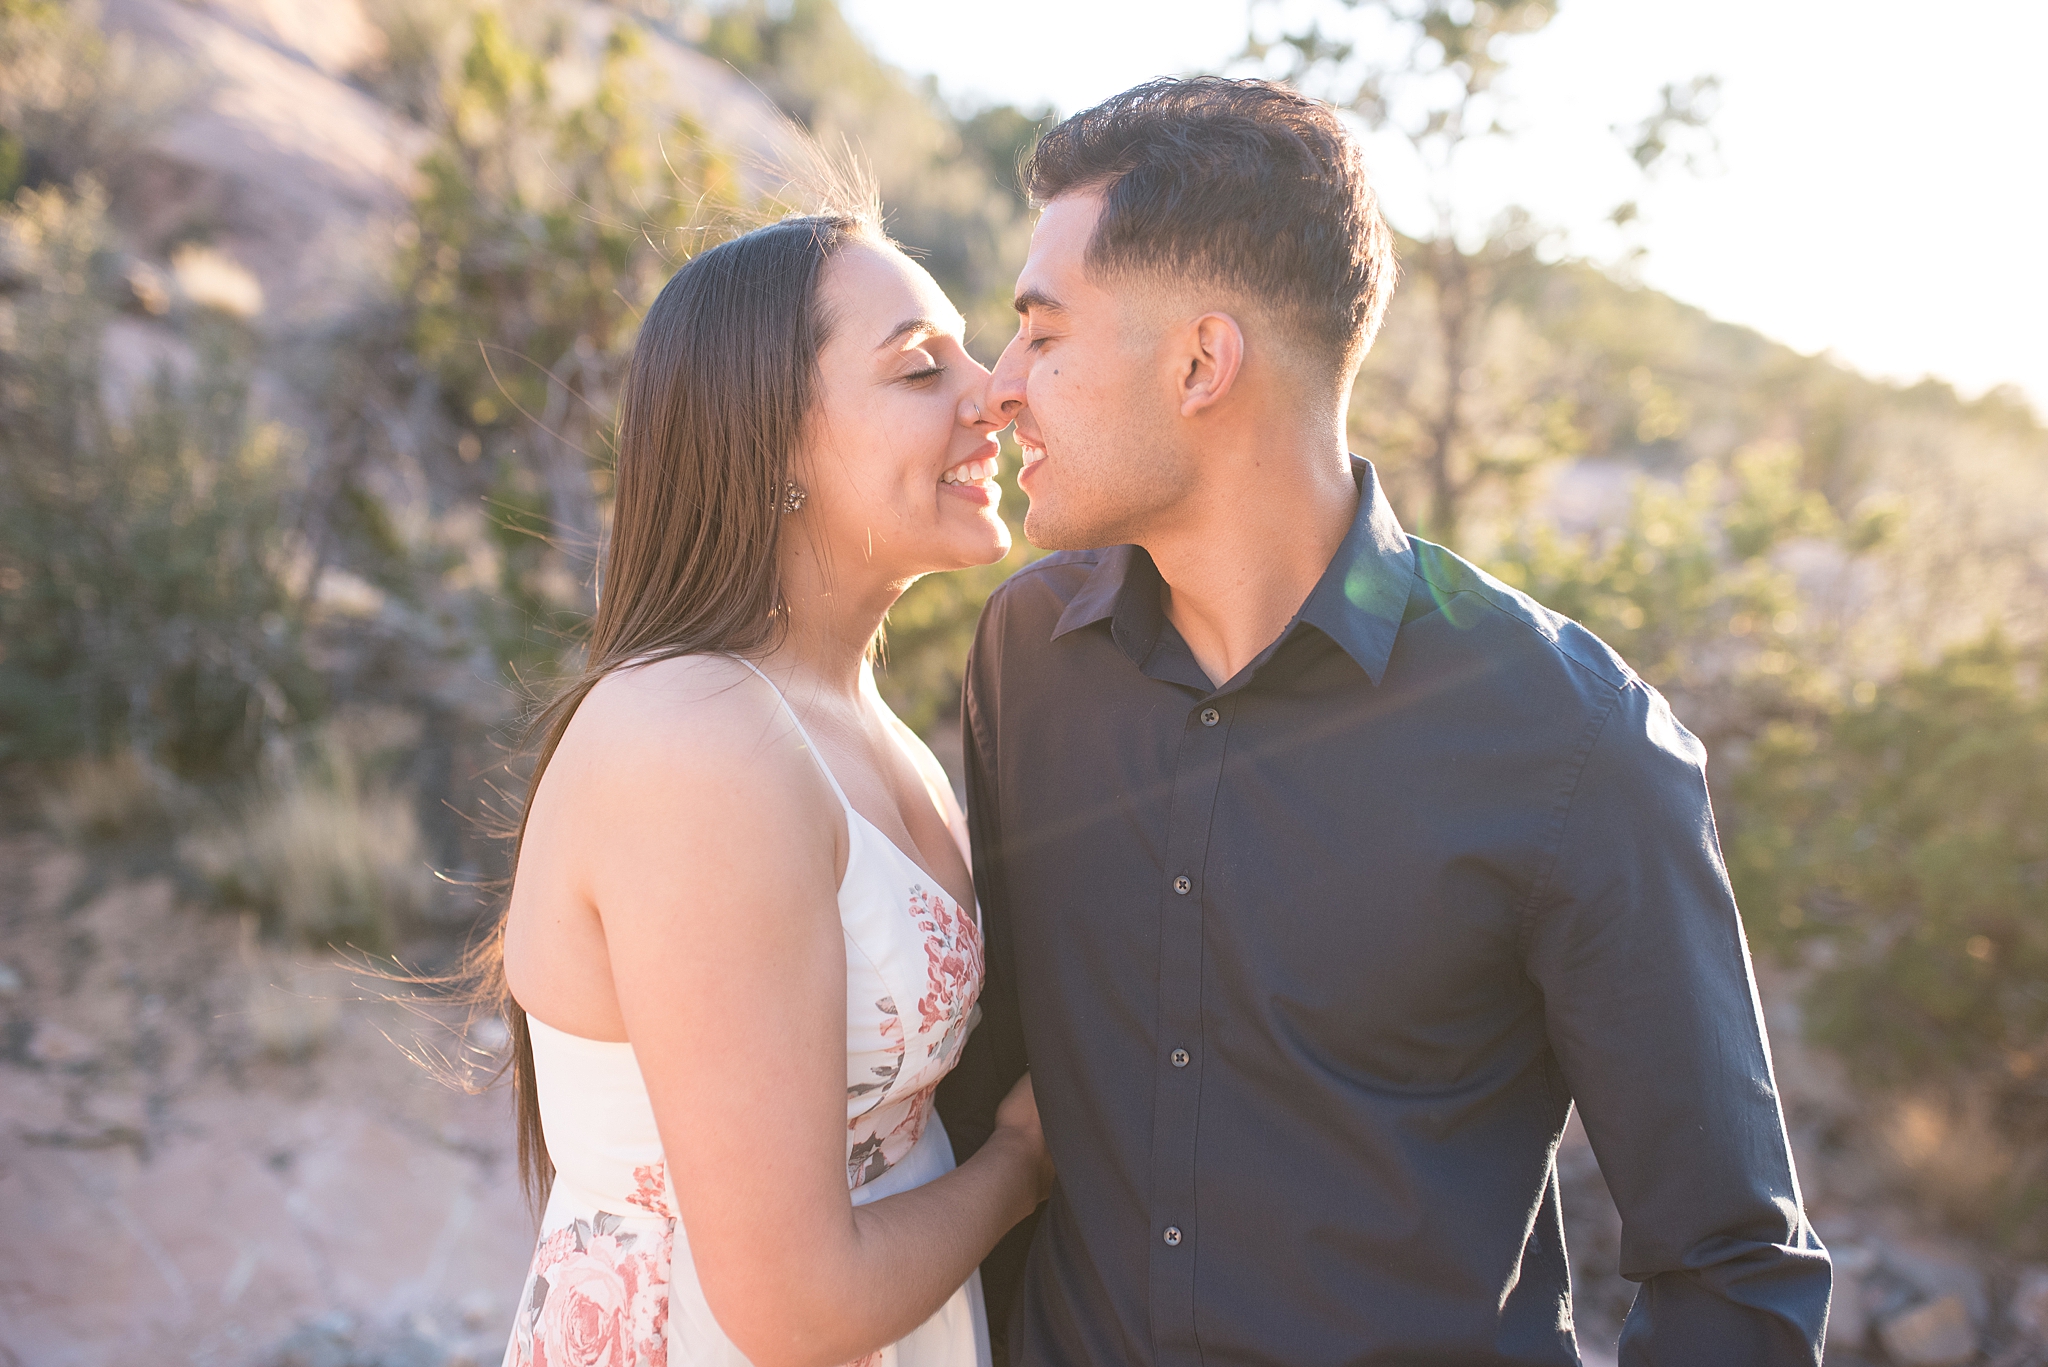 bosque brewery engagement session placitas mountains foothills albuquerque wedding photography new mexico wedding photographer kayla kitts photography_0016.jpg